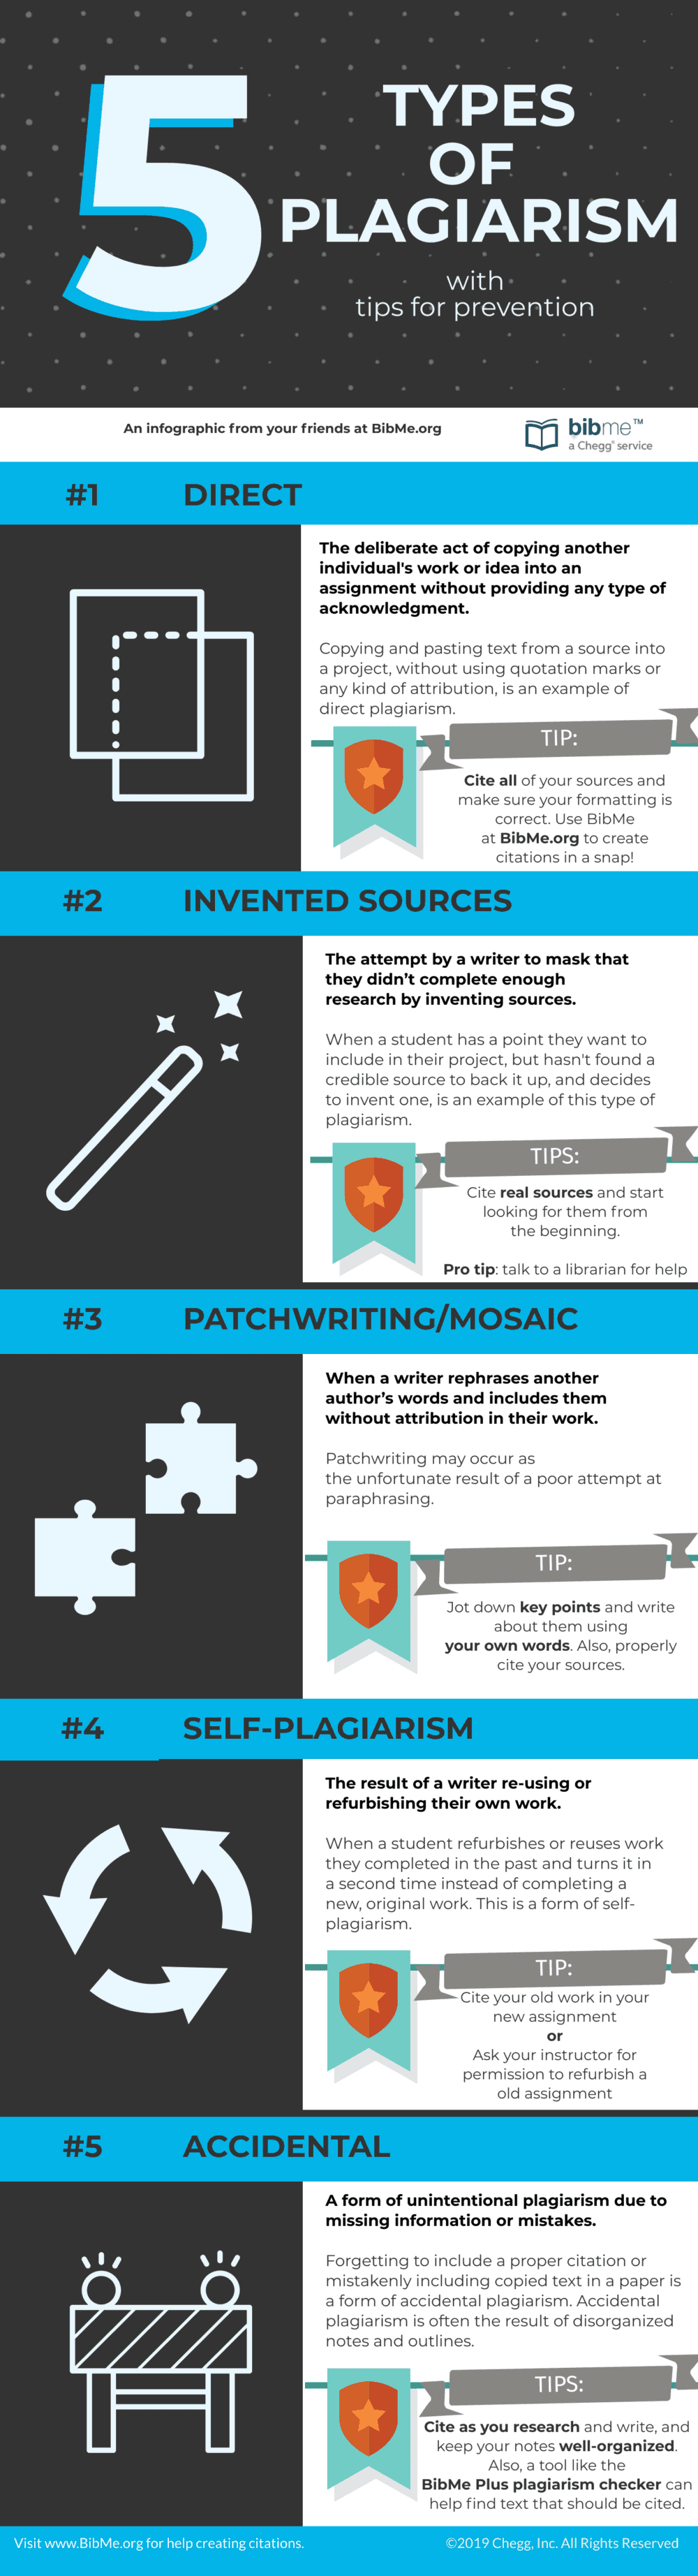 5 Types of Plagiarism Infographic